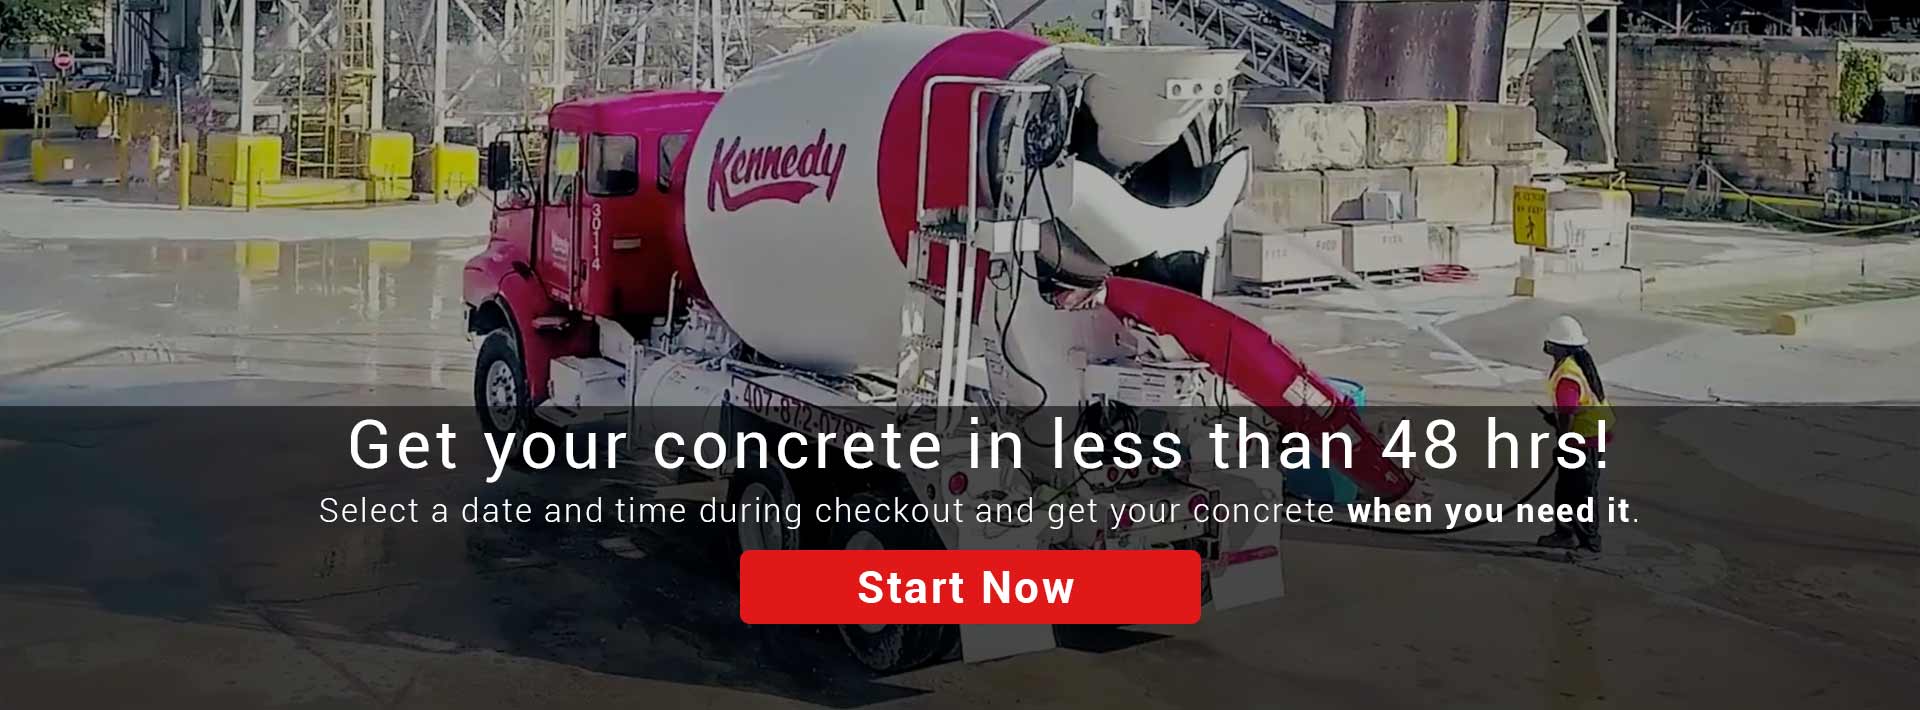 Get your concrete in less than 48 hrs